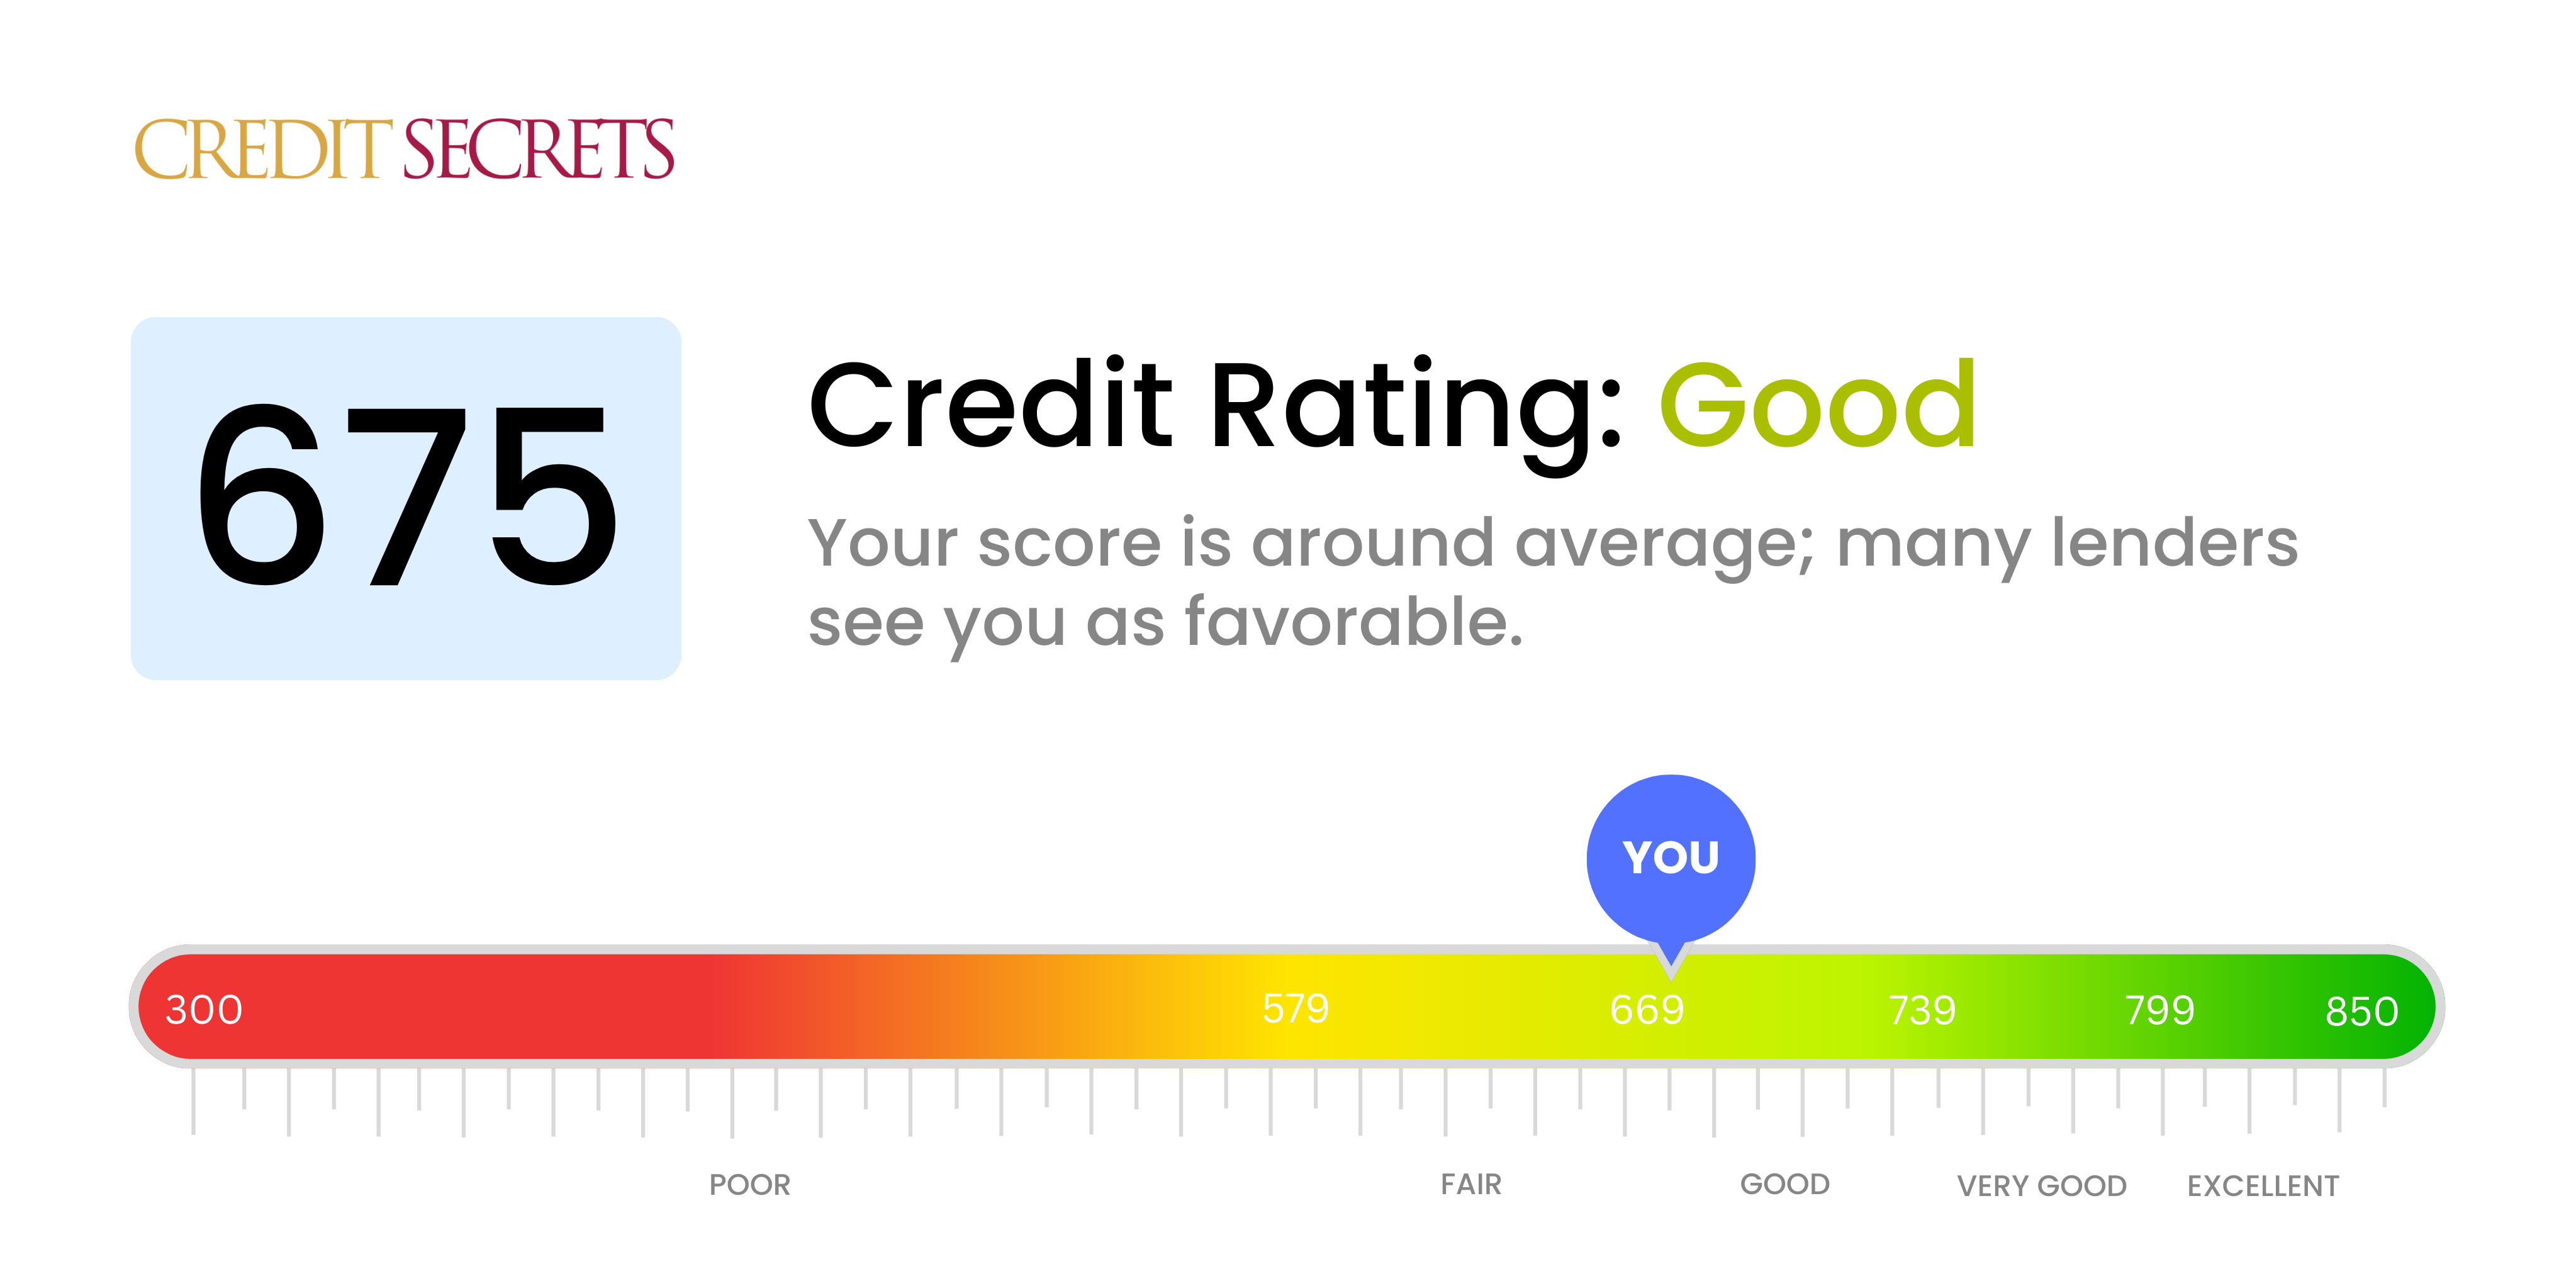 Is 675 a good credit score?